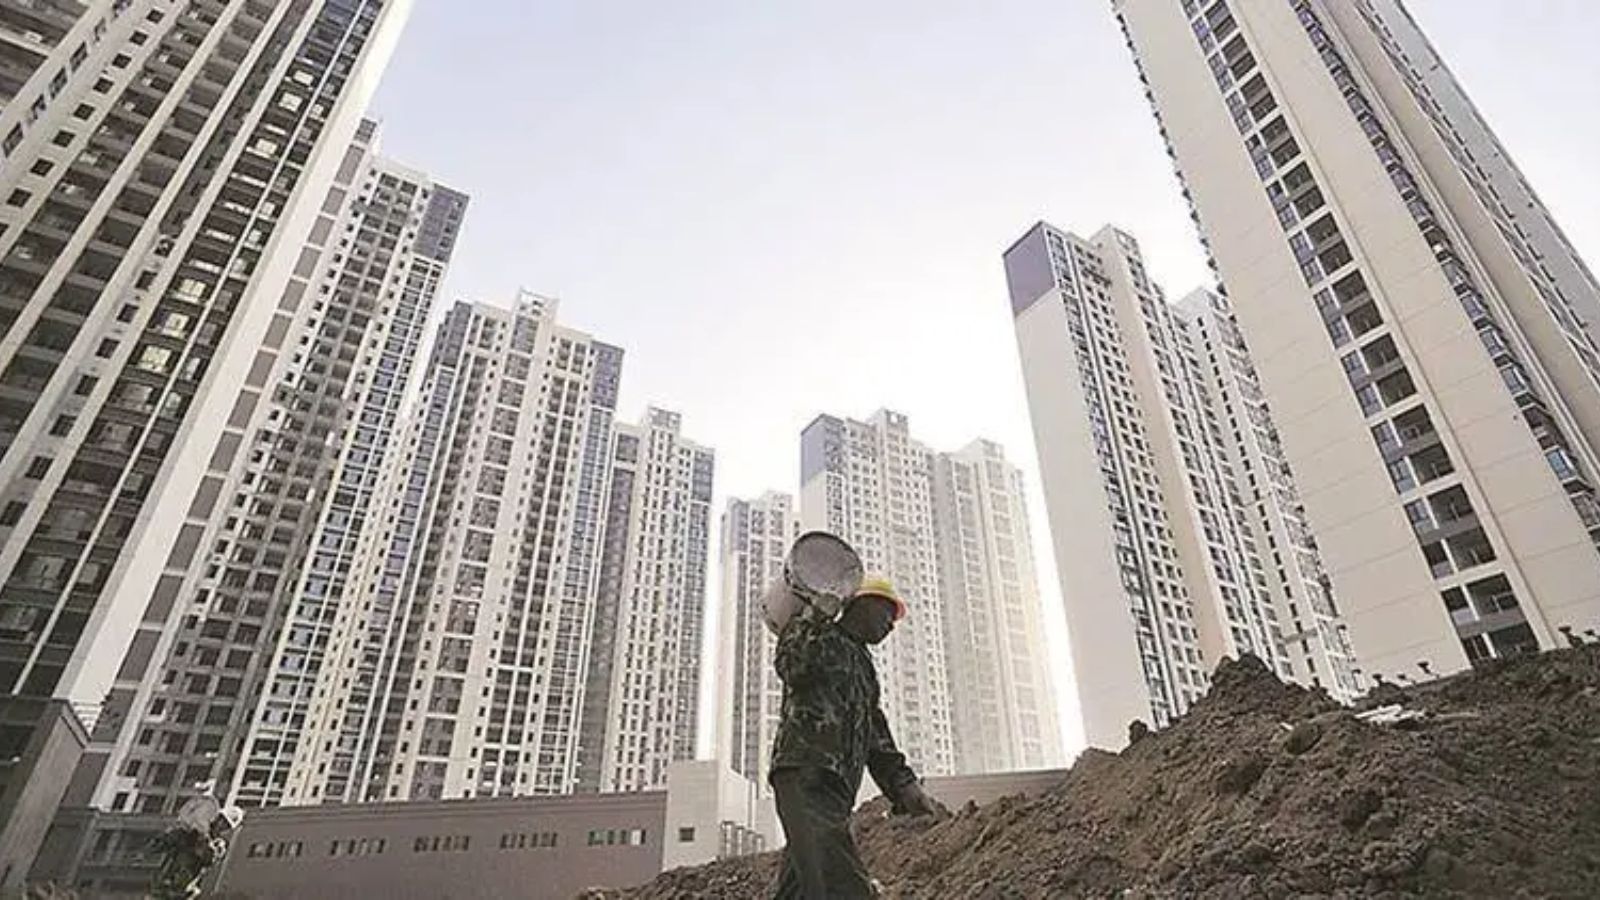 Labourer falls to death from 9th floor of Mumbai building, contractor booked | Mumbai News